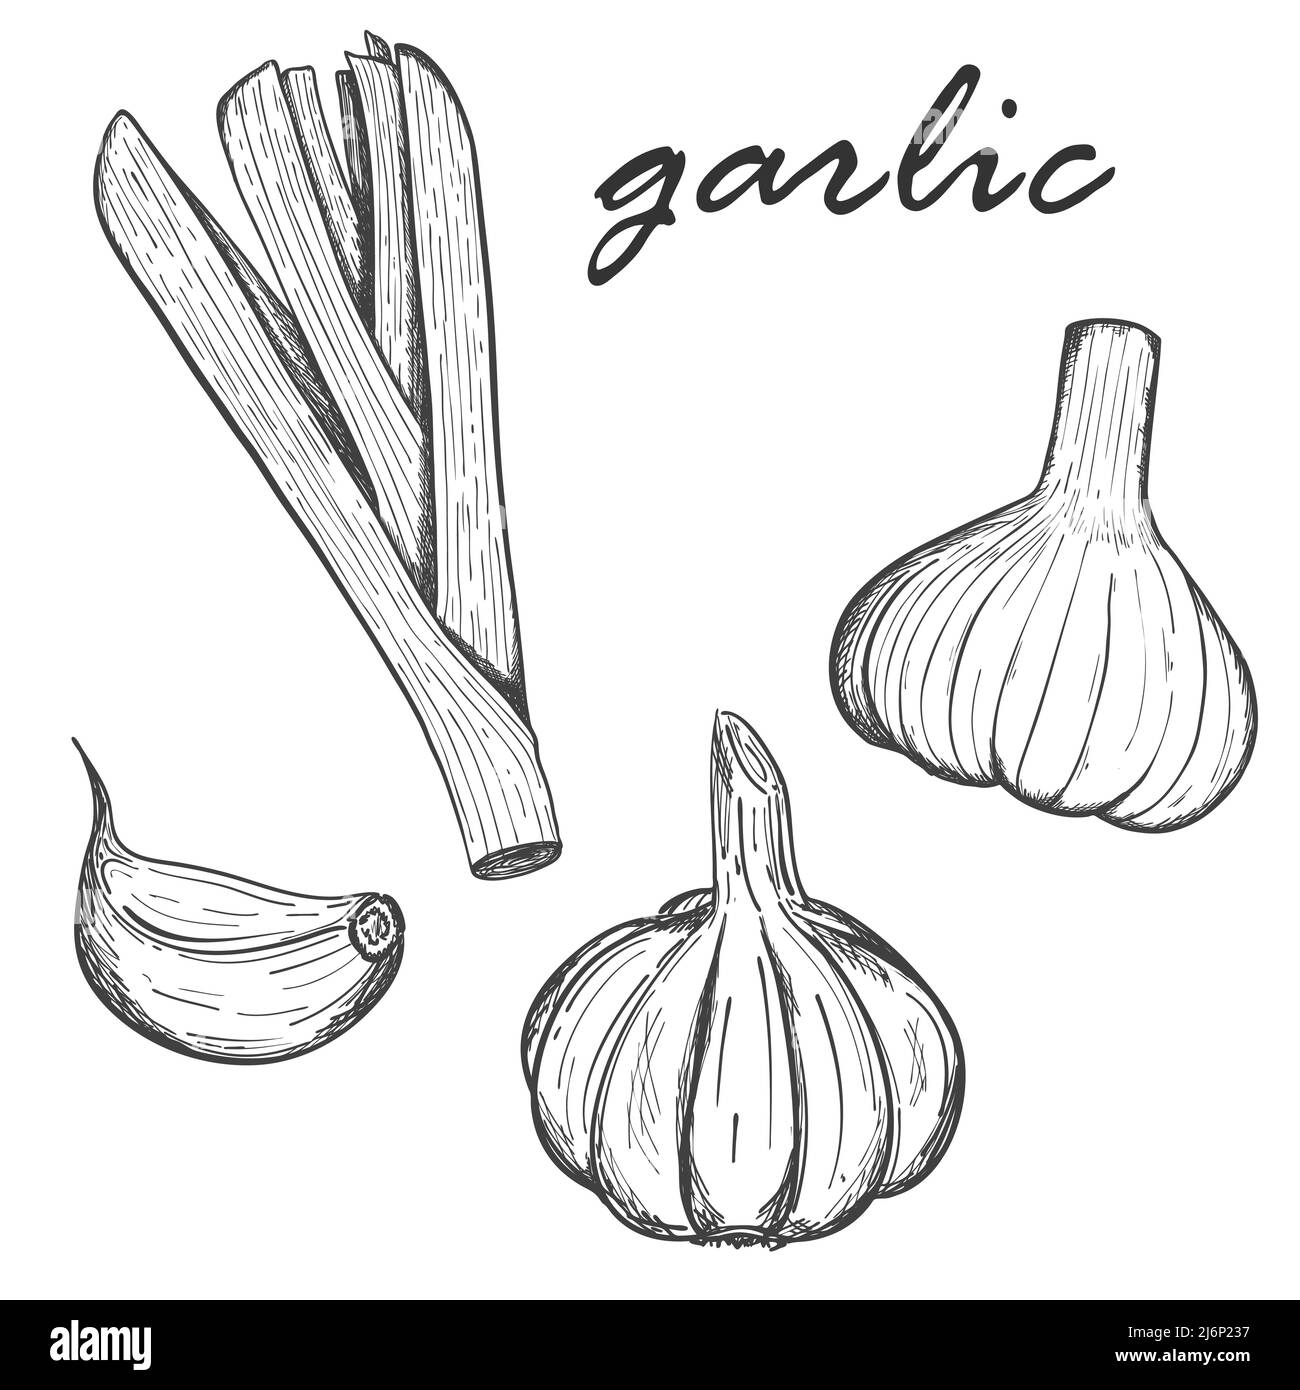 A collection of garlic. Set of garlic Clove, whole head and greens. For menu design, recipes, and cooking magazines. Black and white vector illustrati Stock Vector